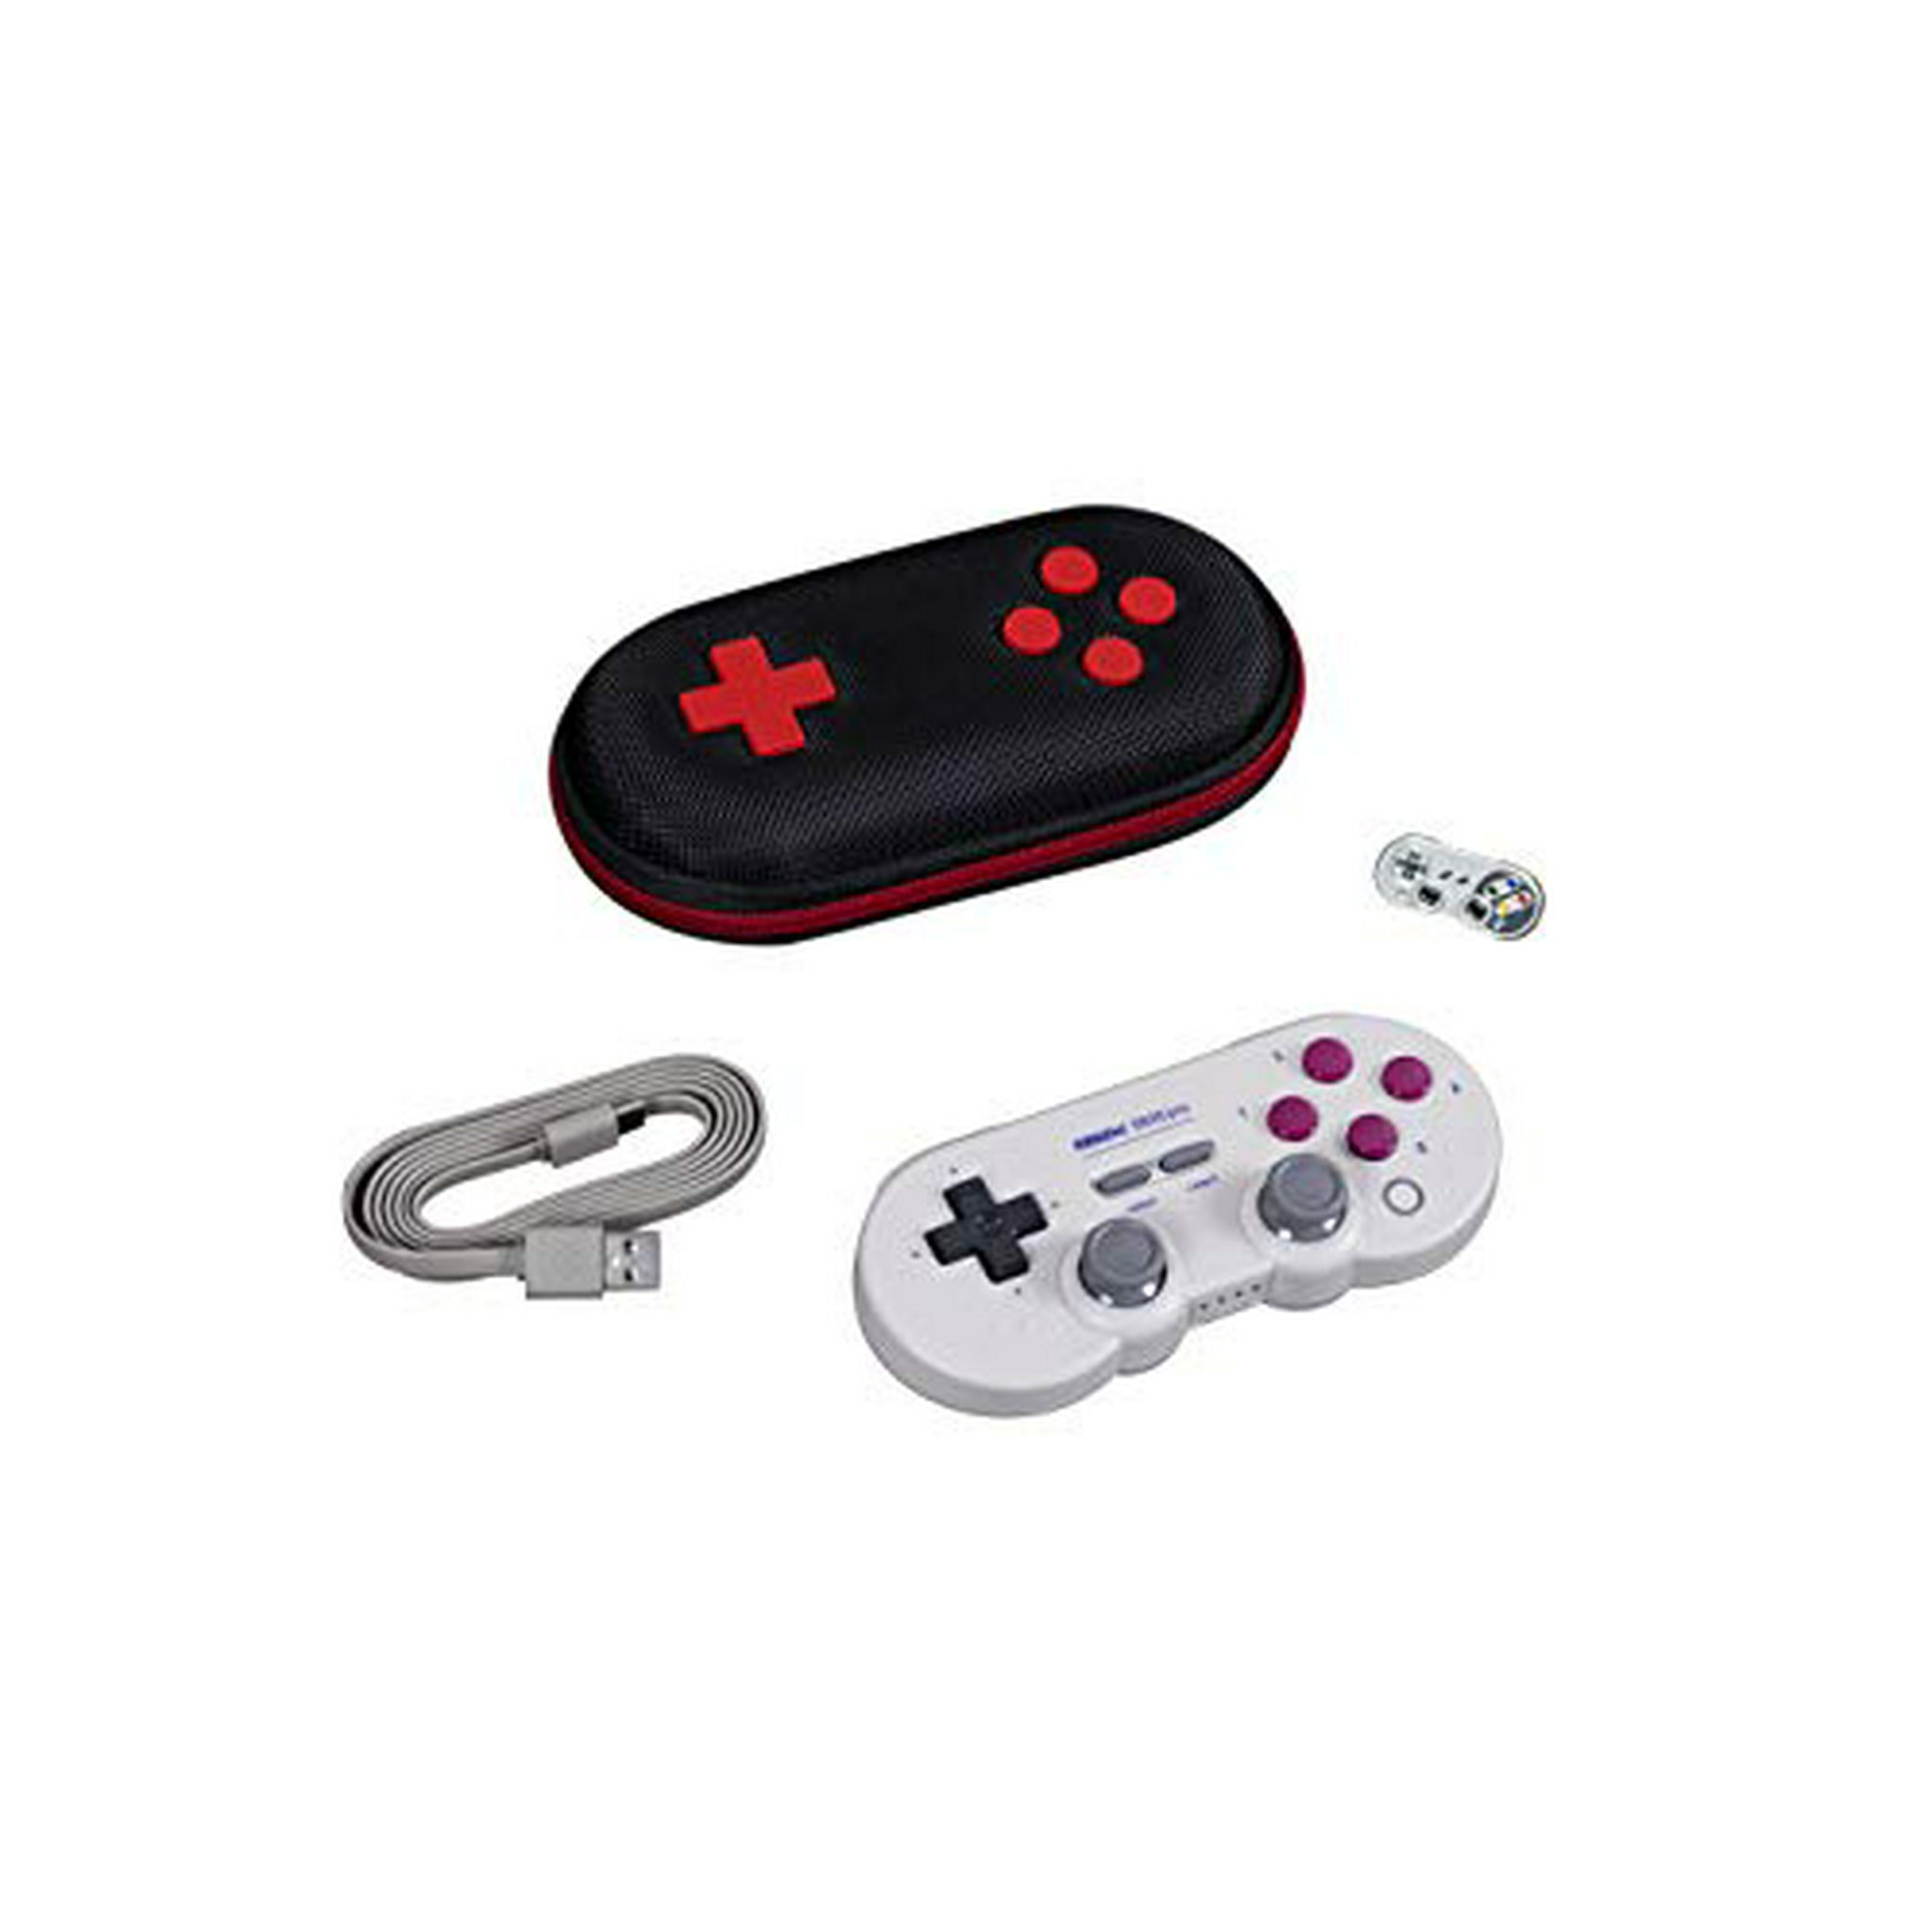 8bitdo Sn30 Pro Bluetooth Gamepad With Classic Travel Case Set Ig Editioni Switch Pc Mac Os Android Walmart Canada